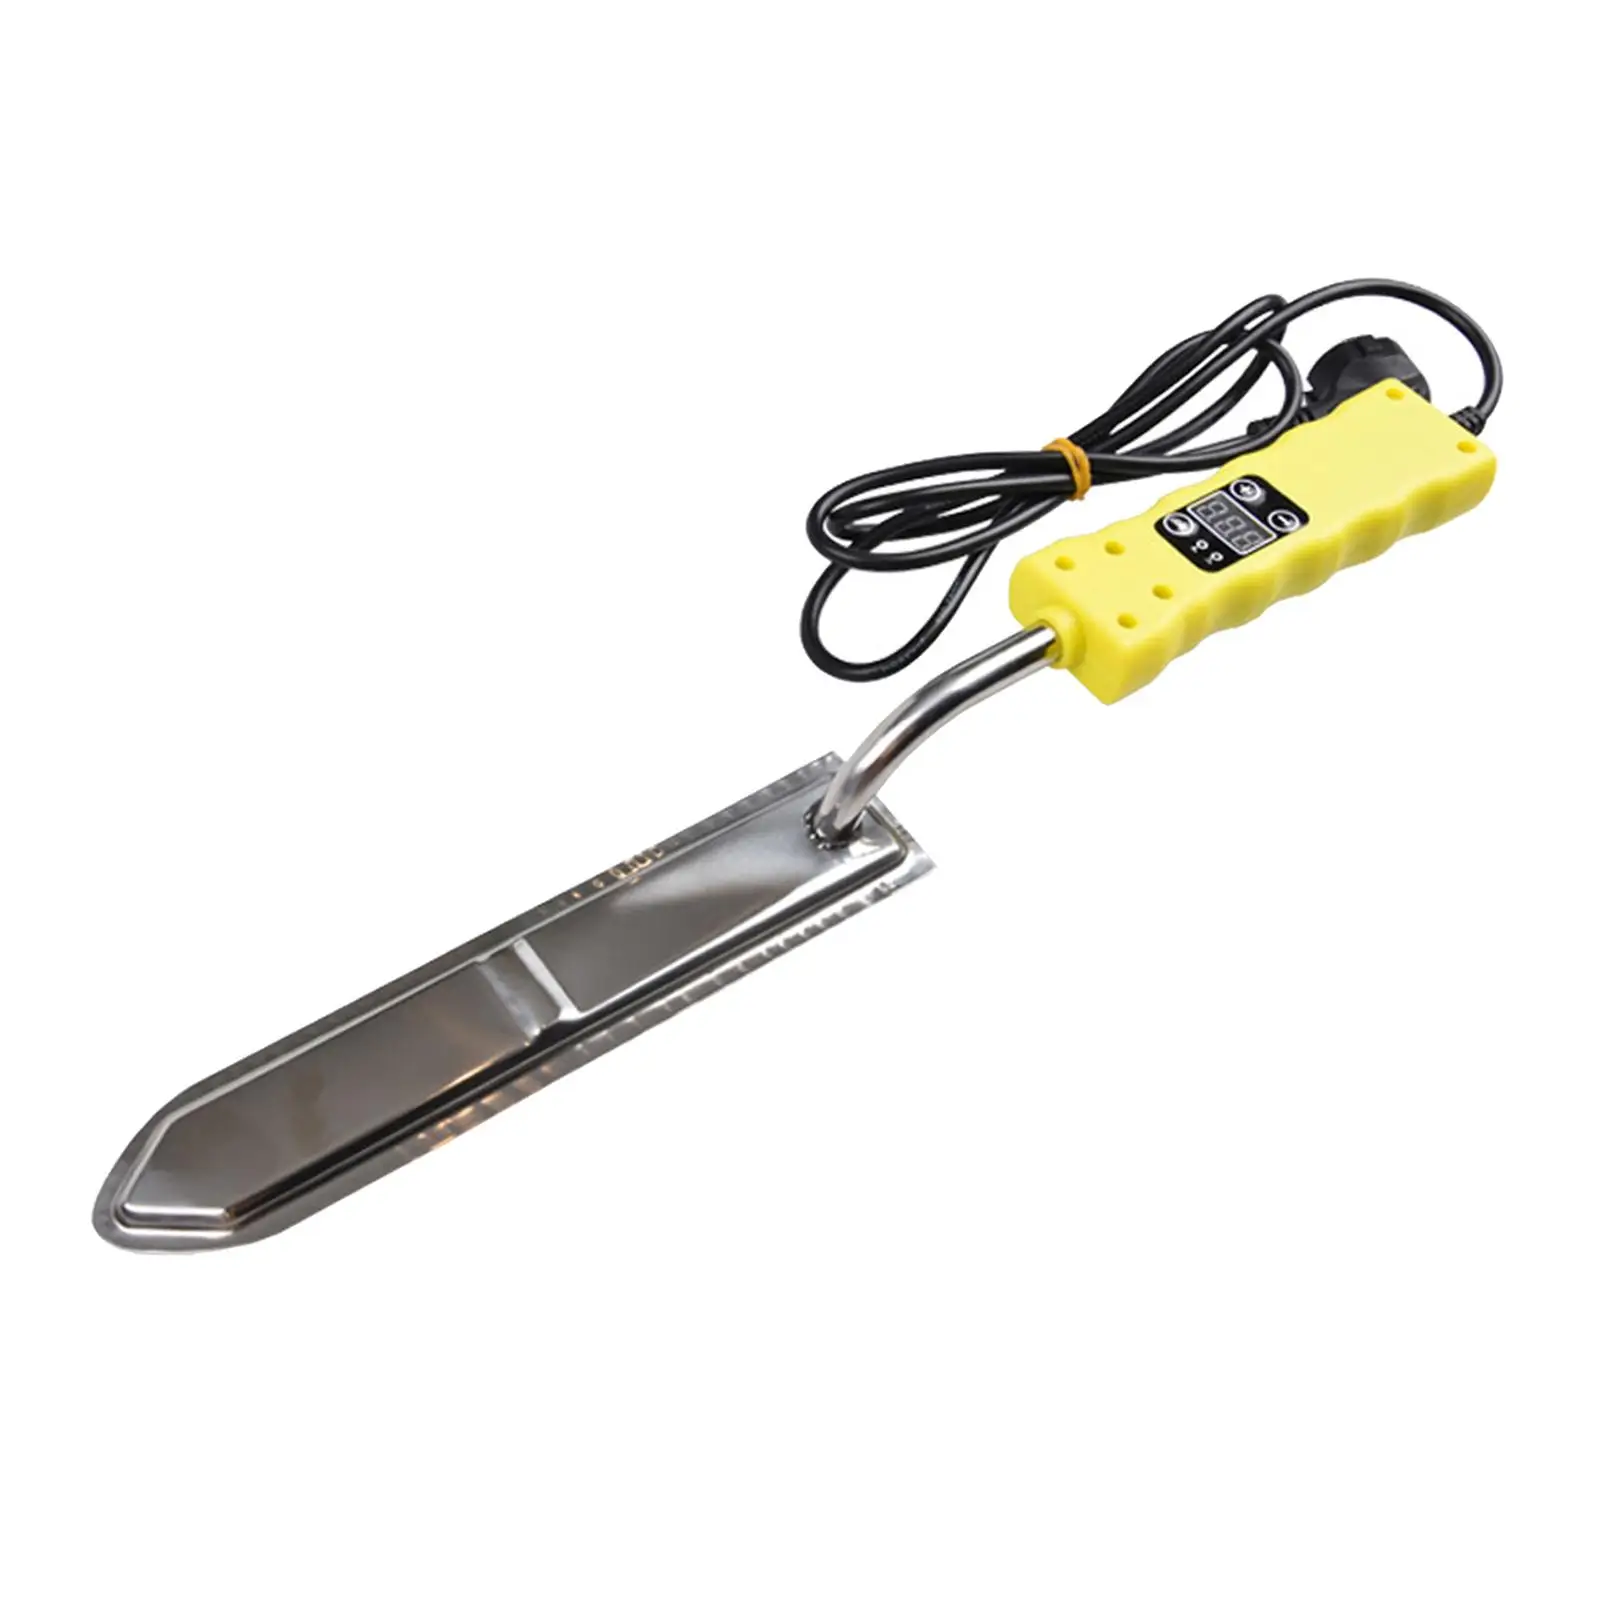 1Pcs Temperature Control Electric Cutting Honey Knife 0-180 Degrees Celsius Beekeeper Beekeeping Bee Tools